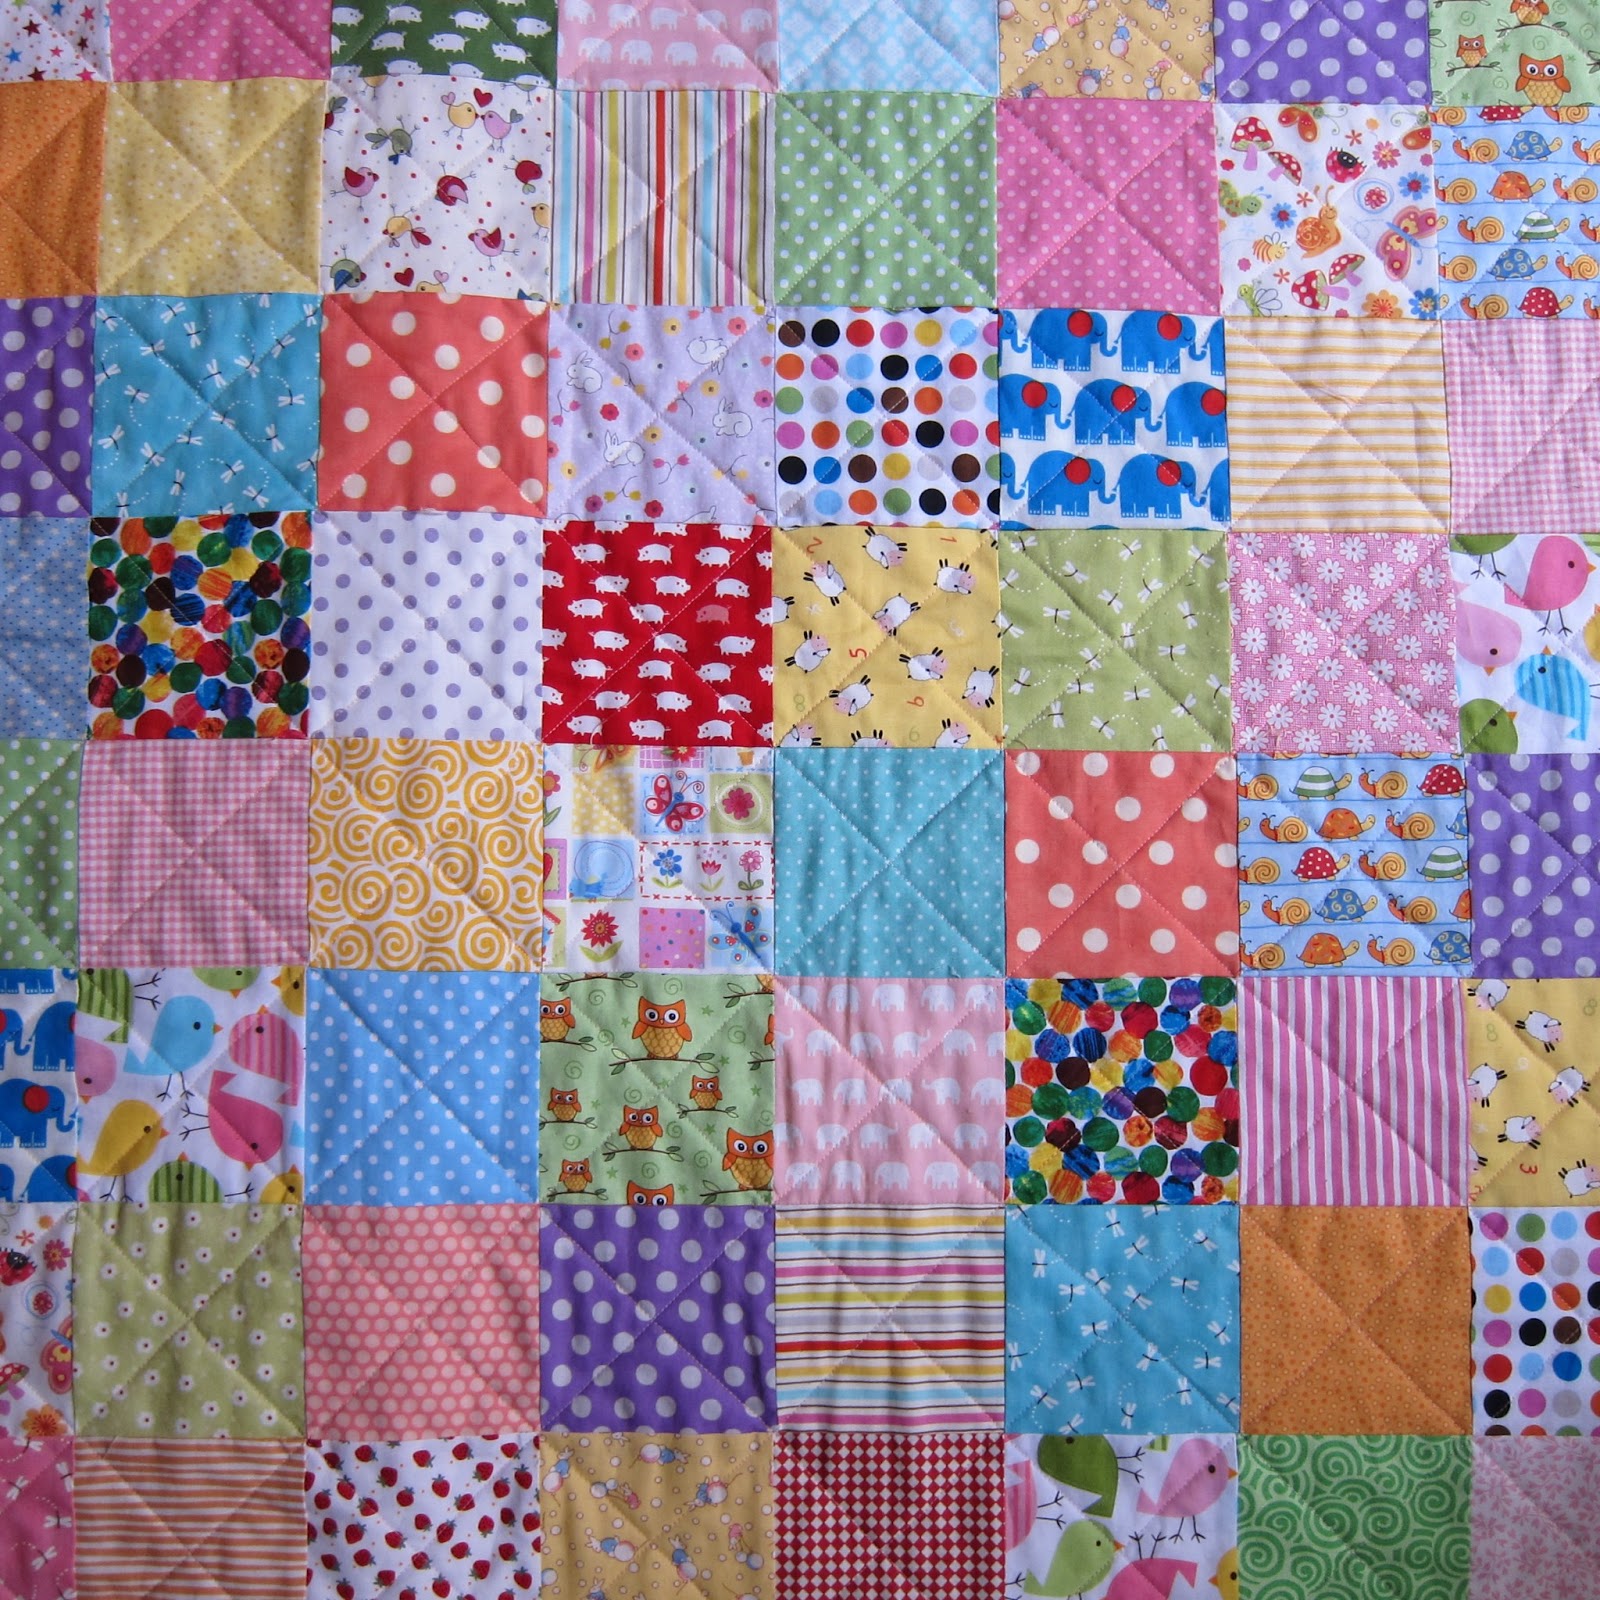 Bashley Quilters Hampshire and Isle of Wight Air Ambulance